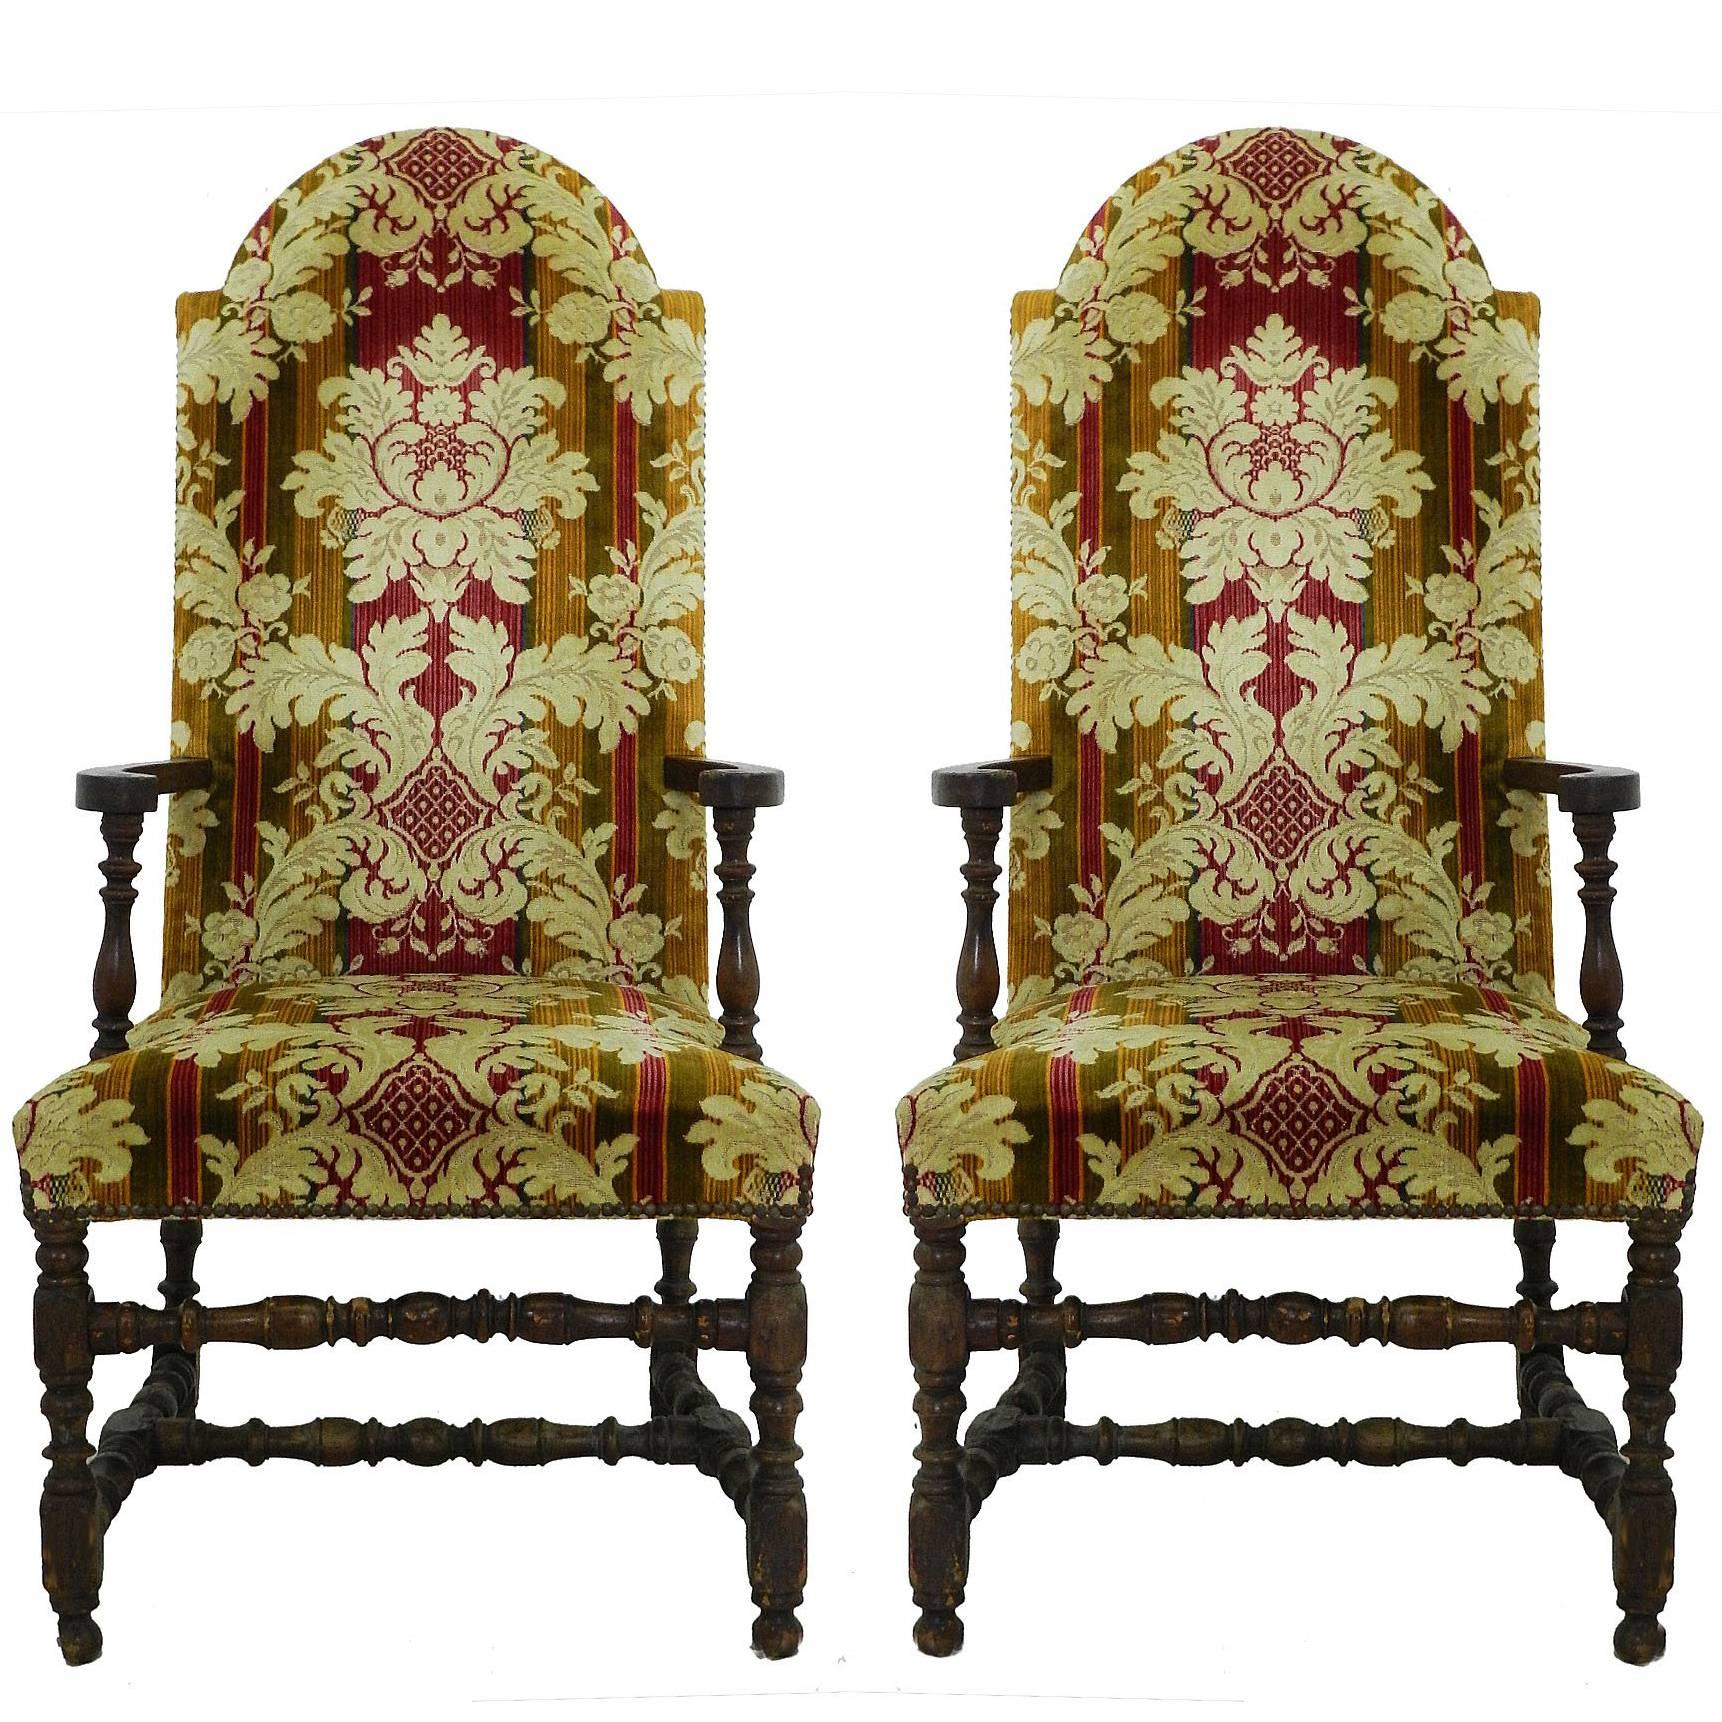 Pair of Throne Chairs 19th Century Spanish Open Armchairs Upholstered circa 1850 For Sale